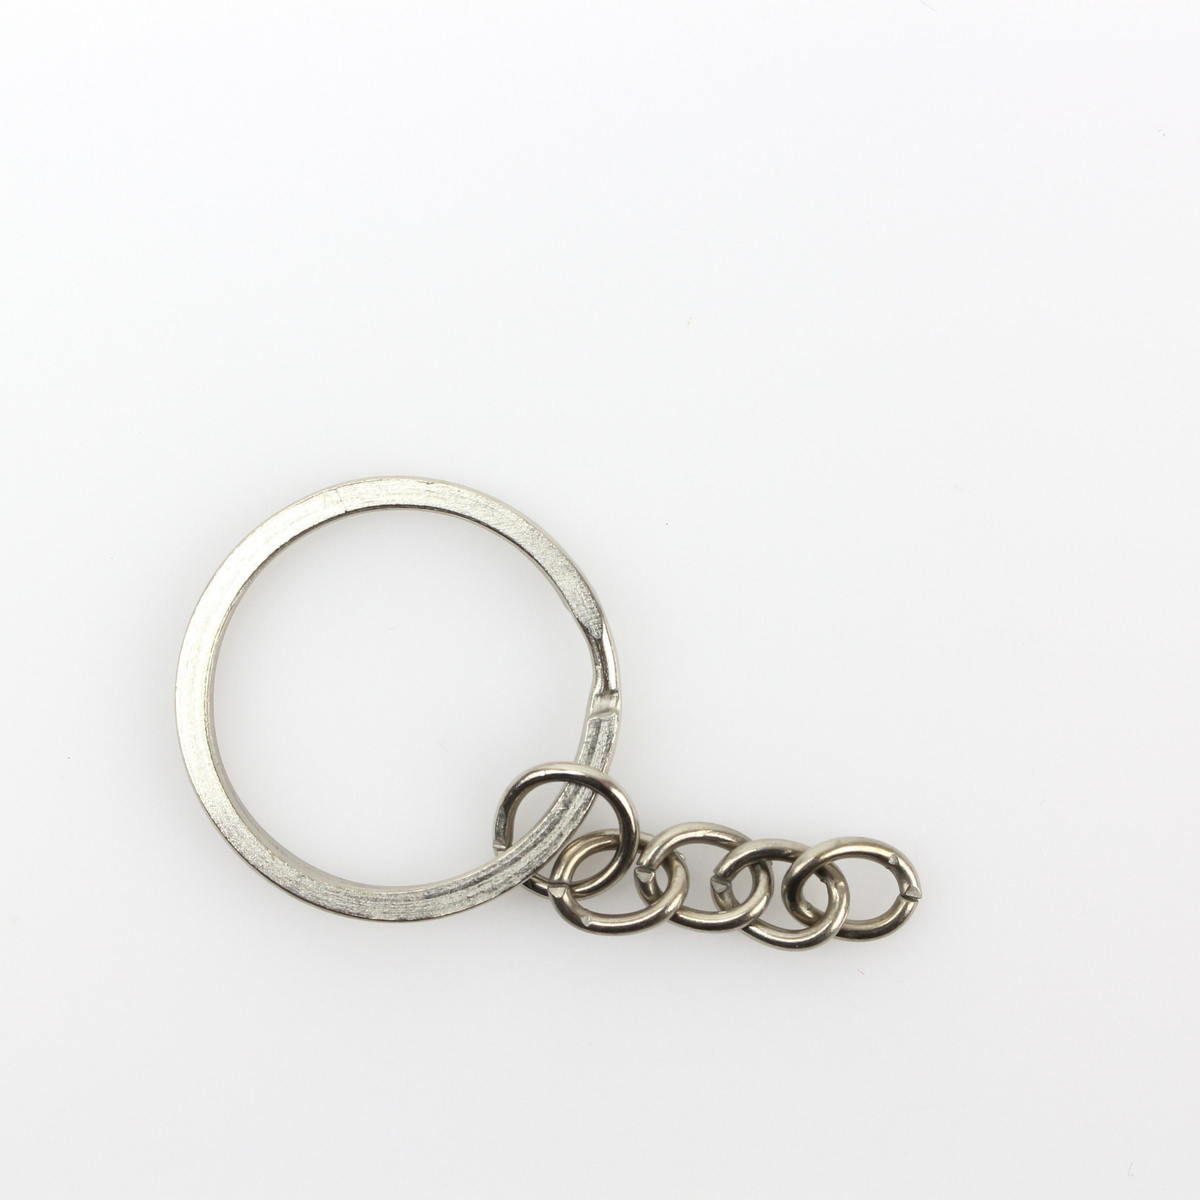 Split Key Ring with Attached Chain - Silver Tone 1 inch keyrings